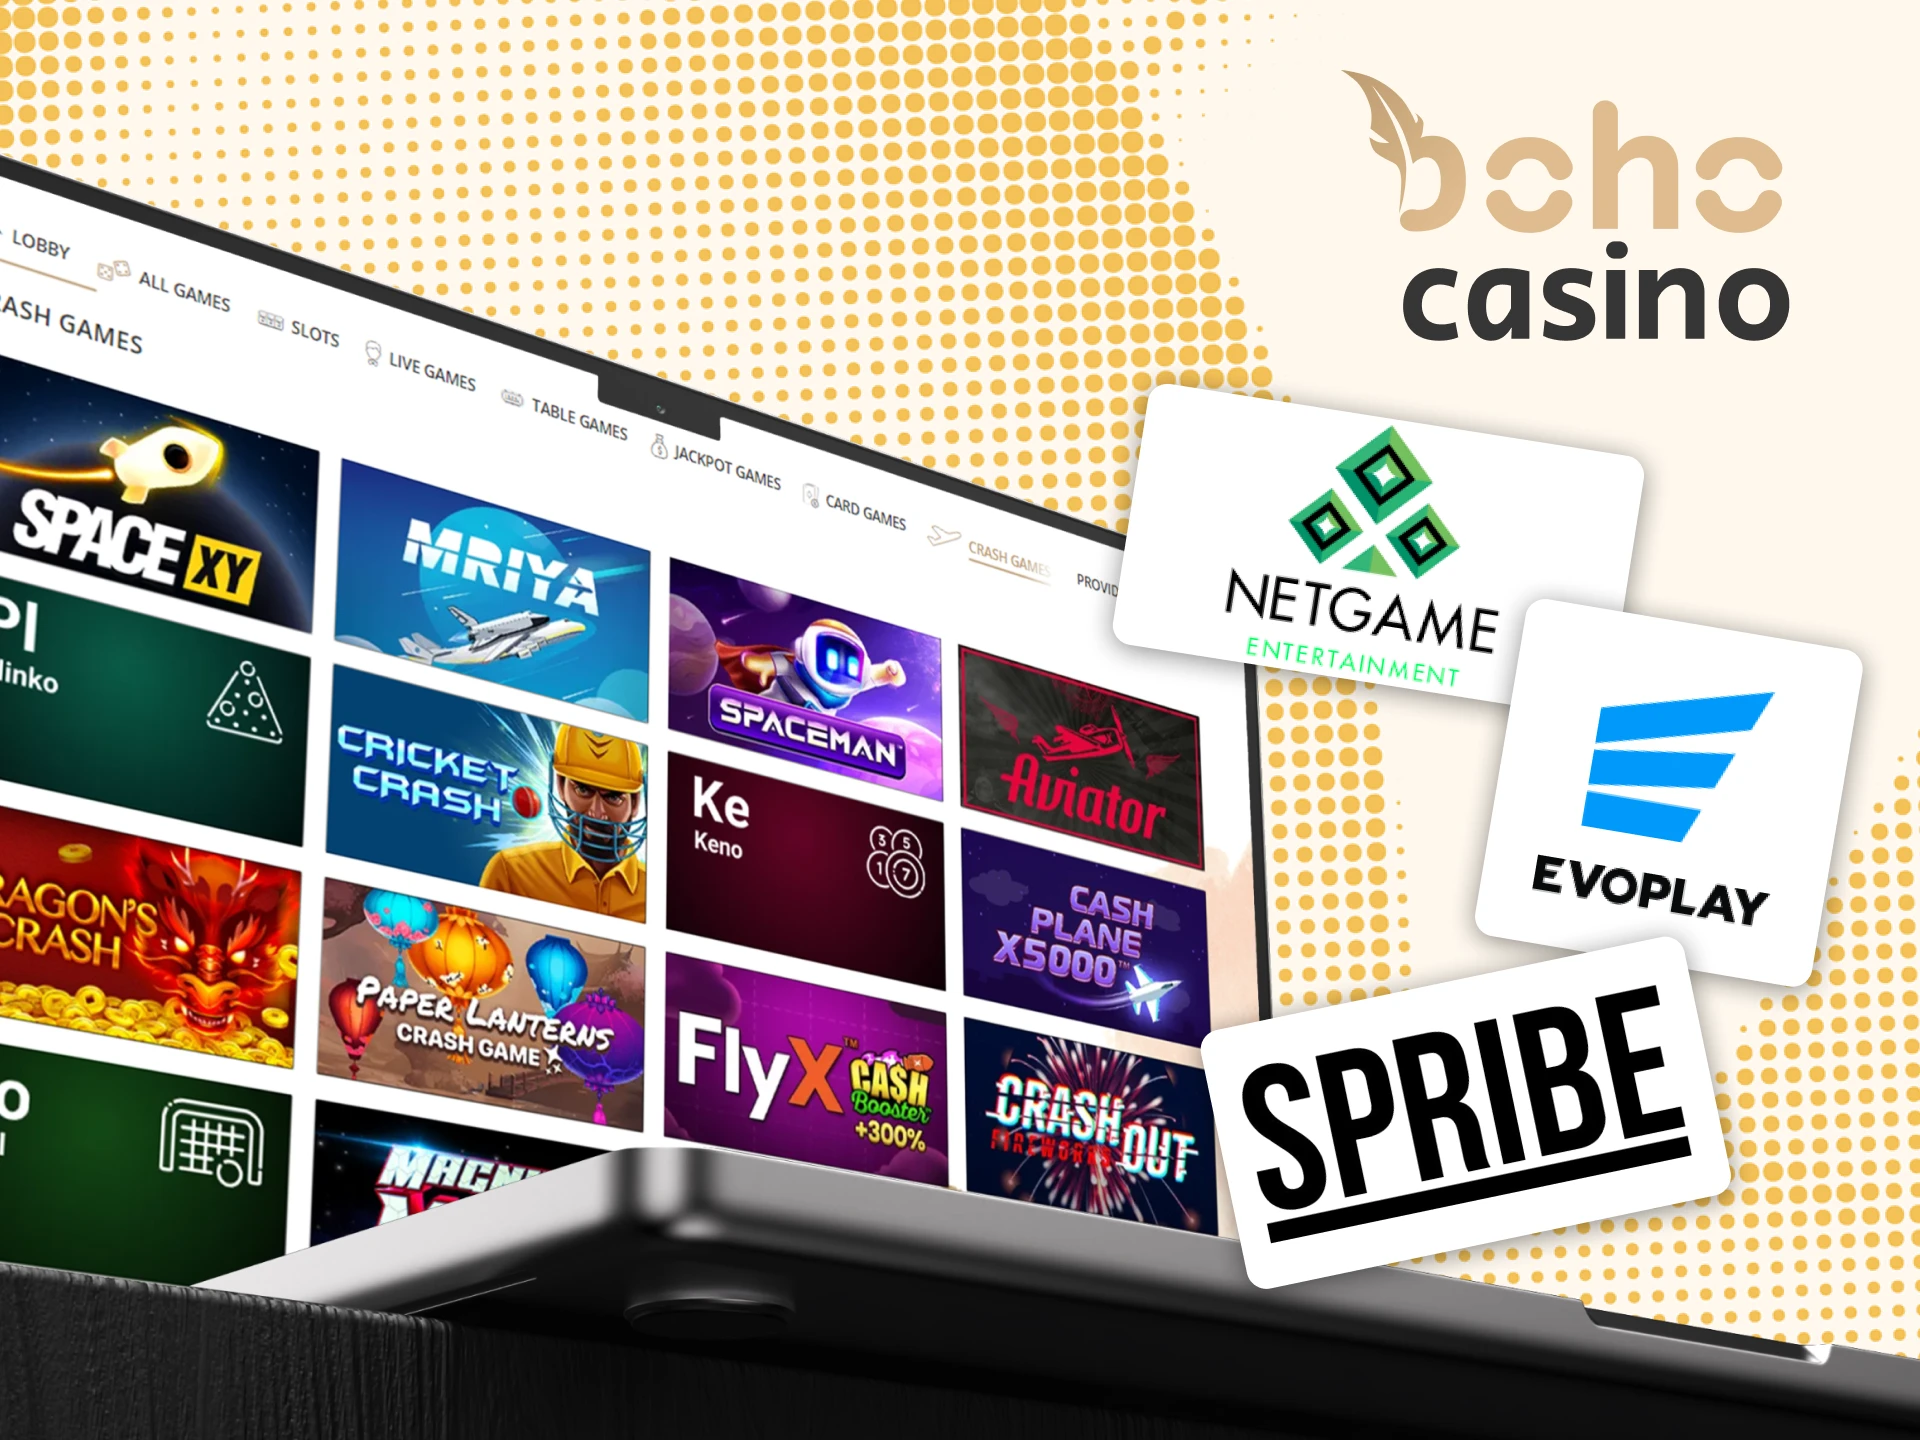 Boho Casino offers crash games from reputable providers.